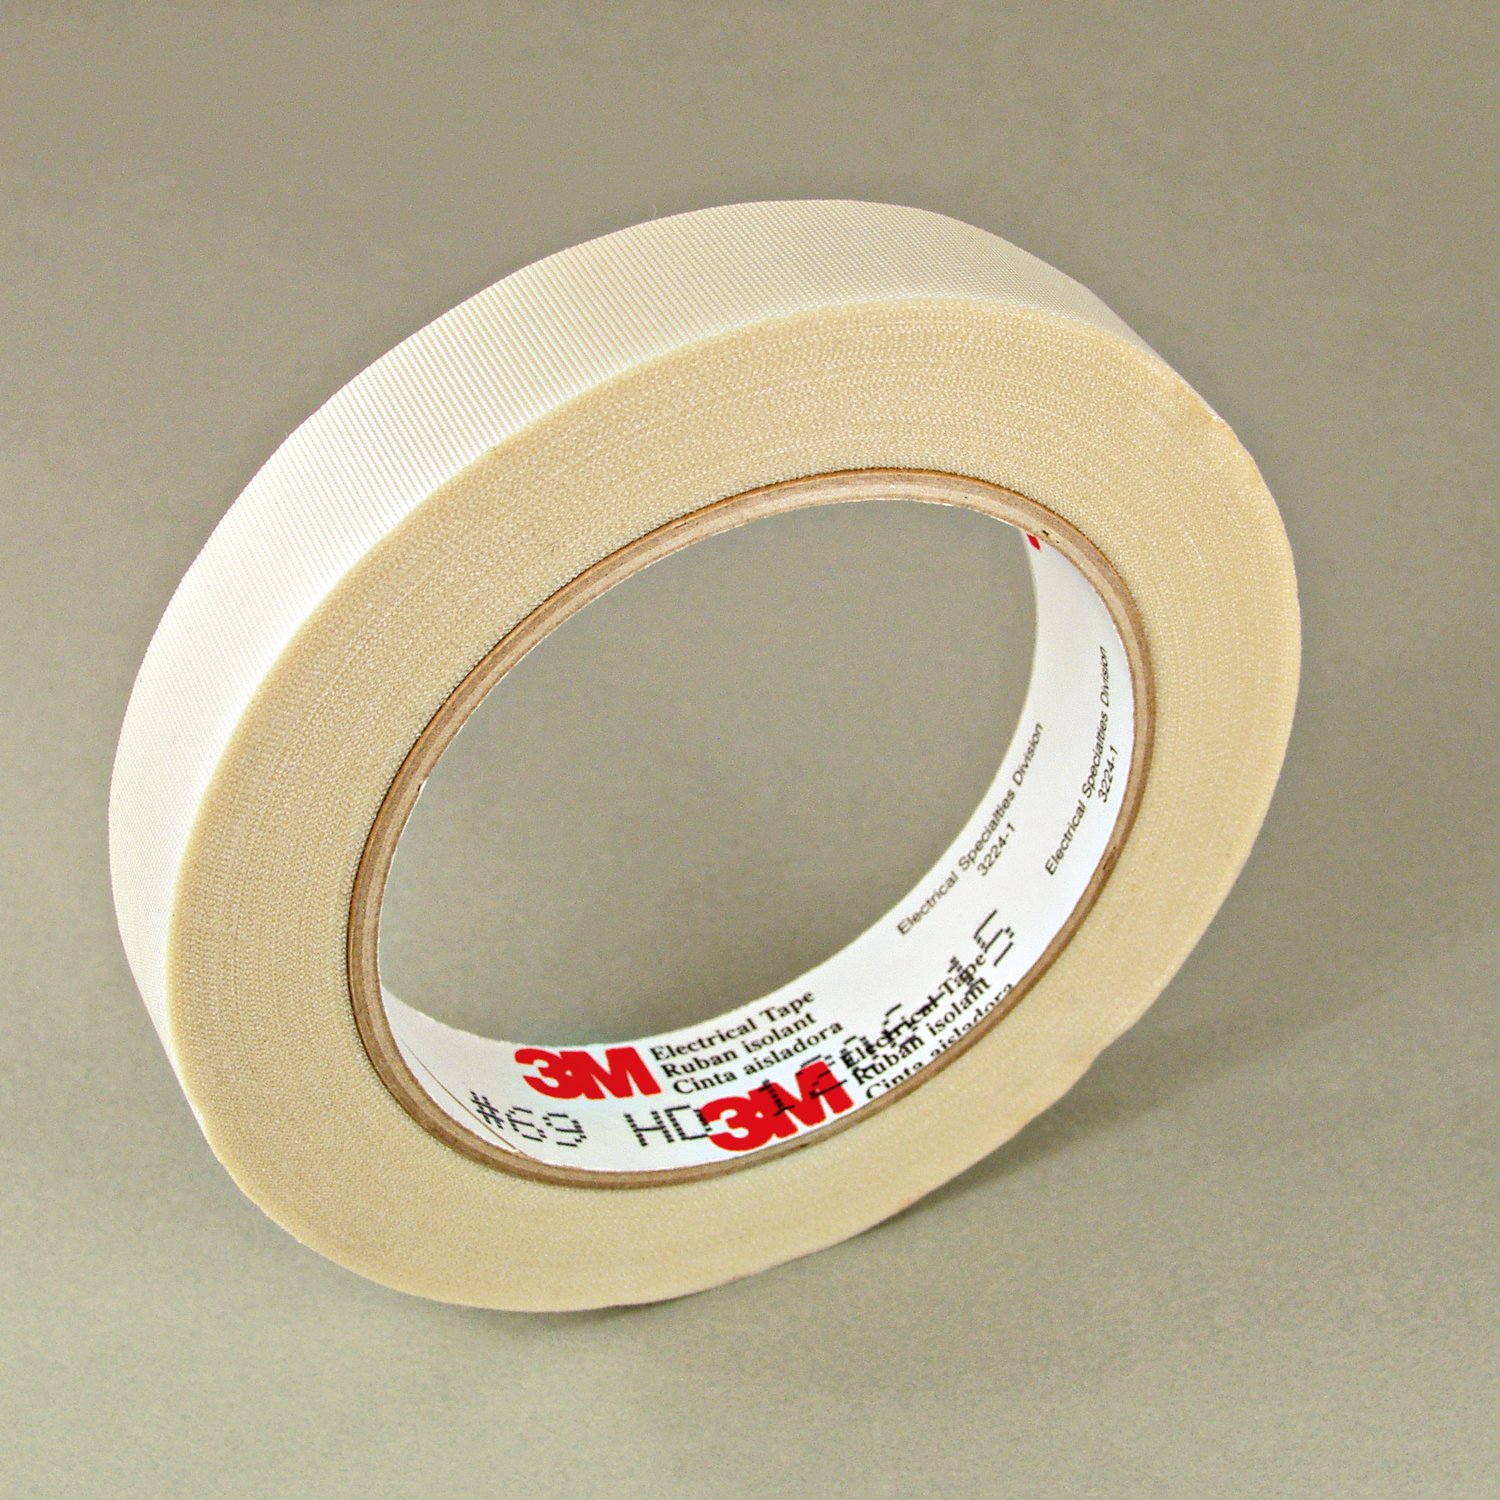 1/2" 3M 69 Glass Cloth Electrical Tape (3M69) with Silicone Adhesive 180°C, white, 1/2" wide x  36 YD roll